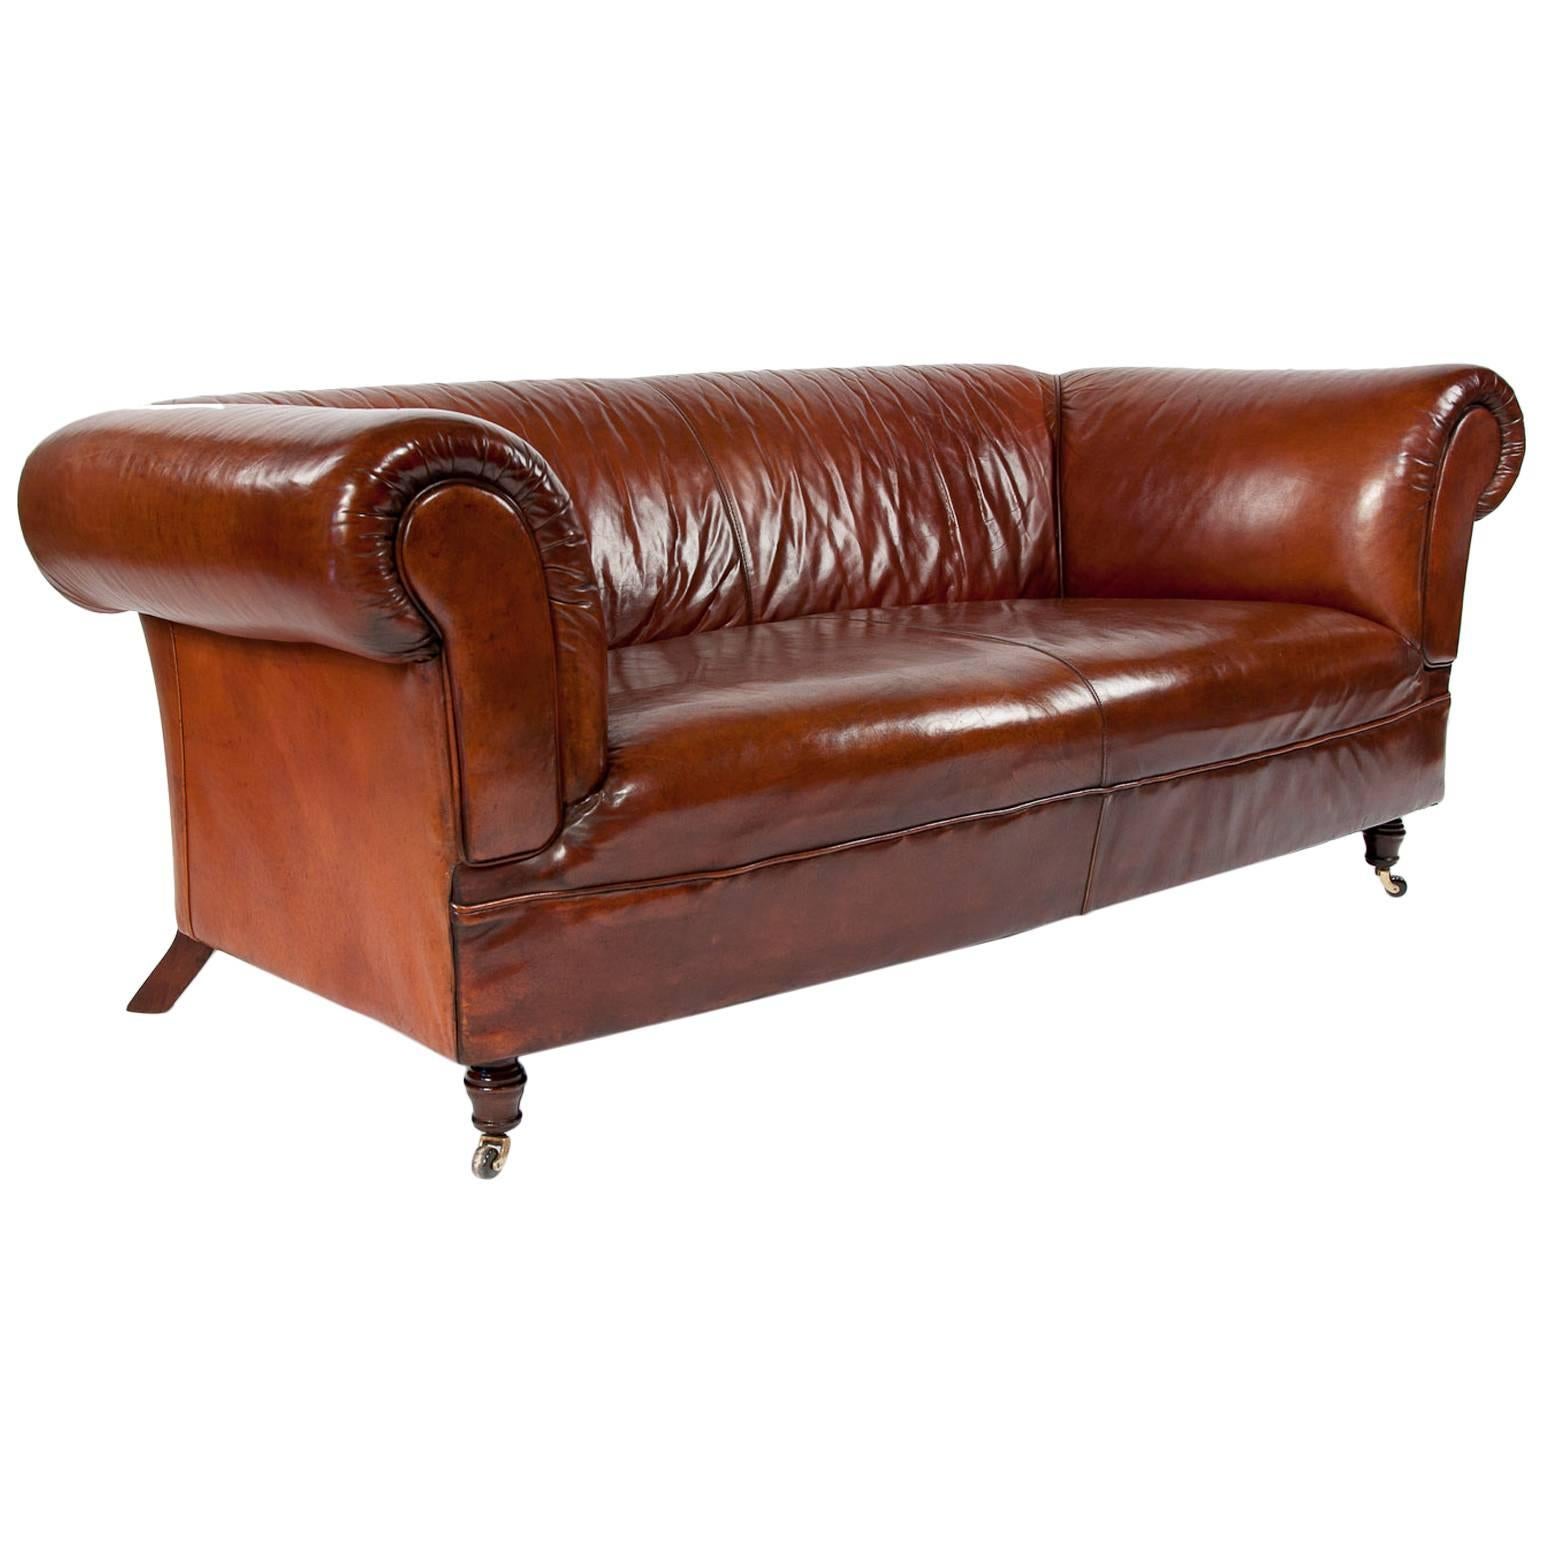 Leather Upholstered Chesterfield Mid-20th Century